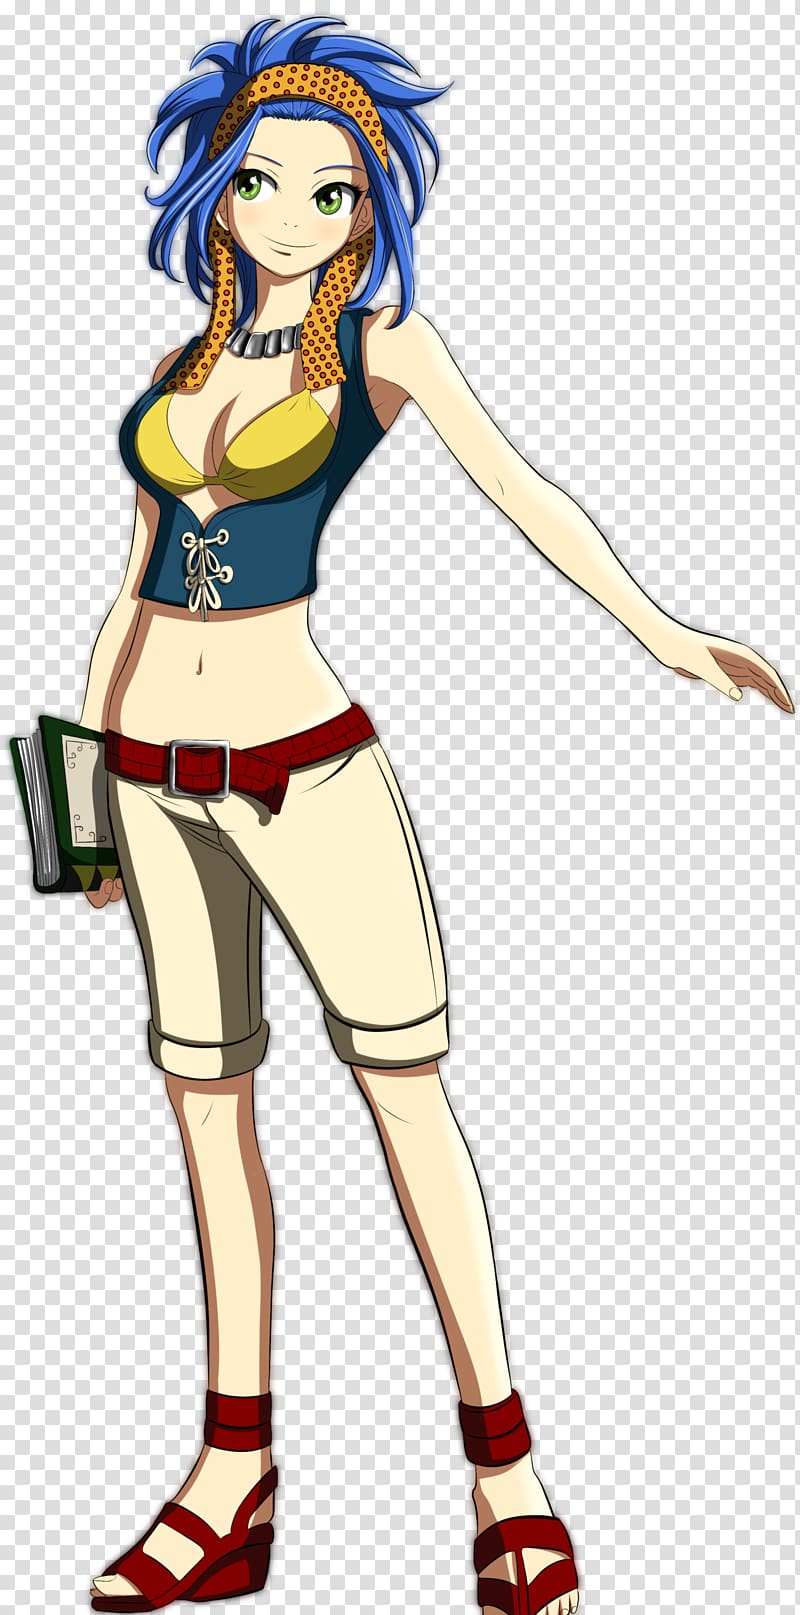 Erza Scarlet Natsu Dragneel Fairy Tail Tokyo in Tulsa Juvia Lockser, ace transparent background PNG clipart